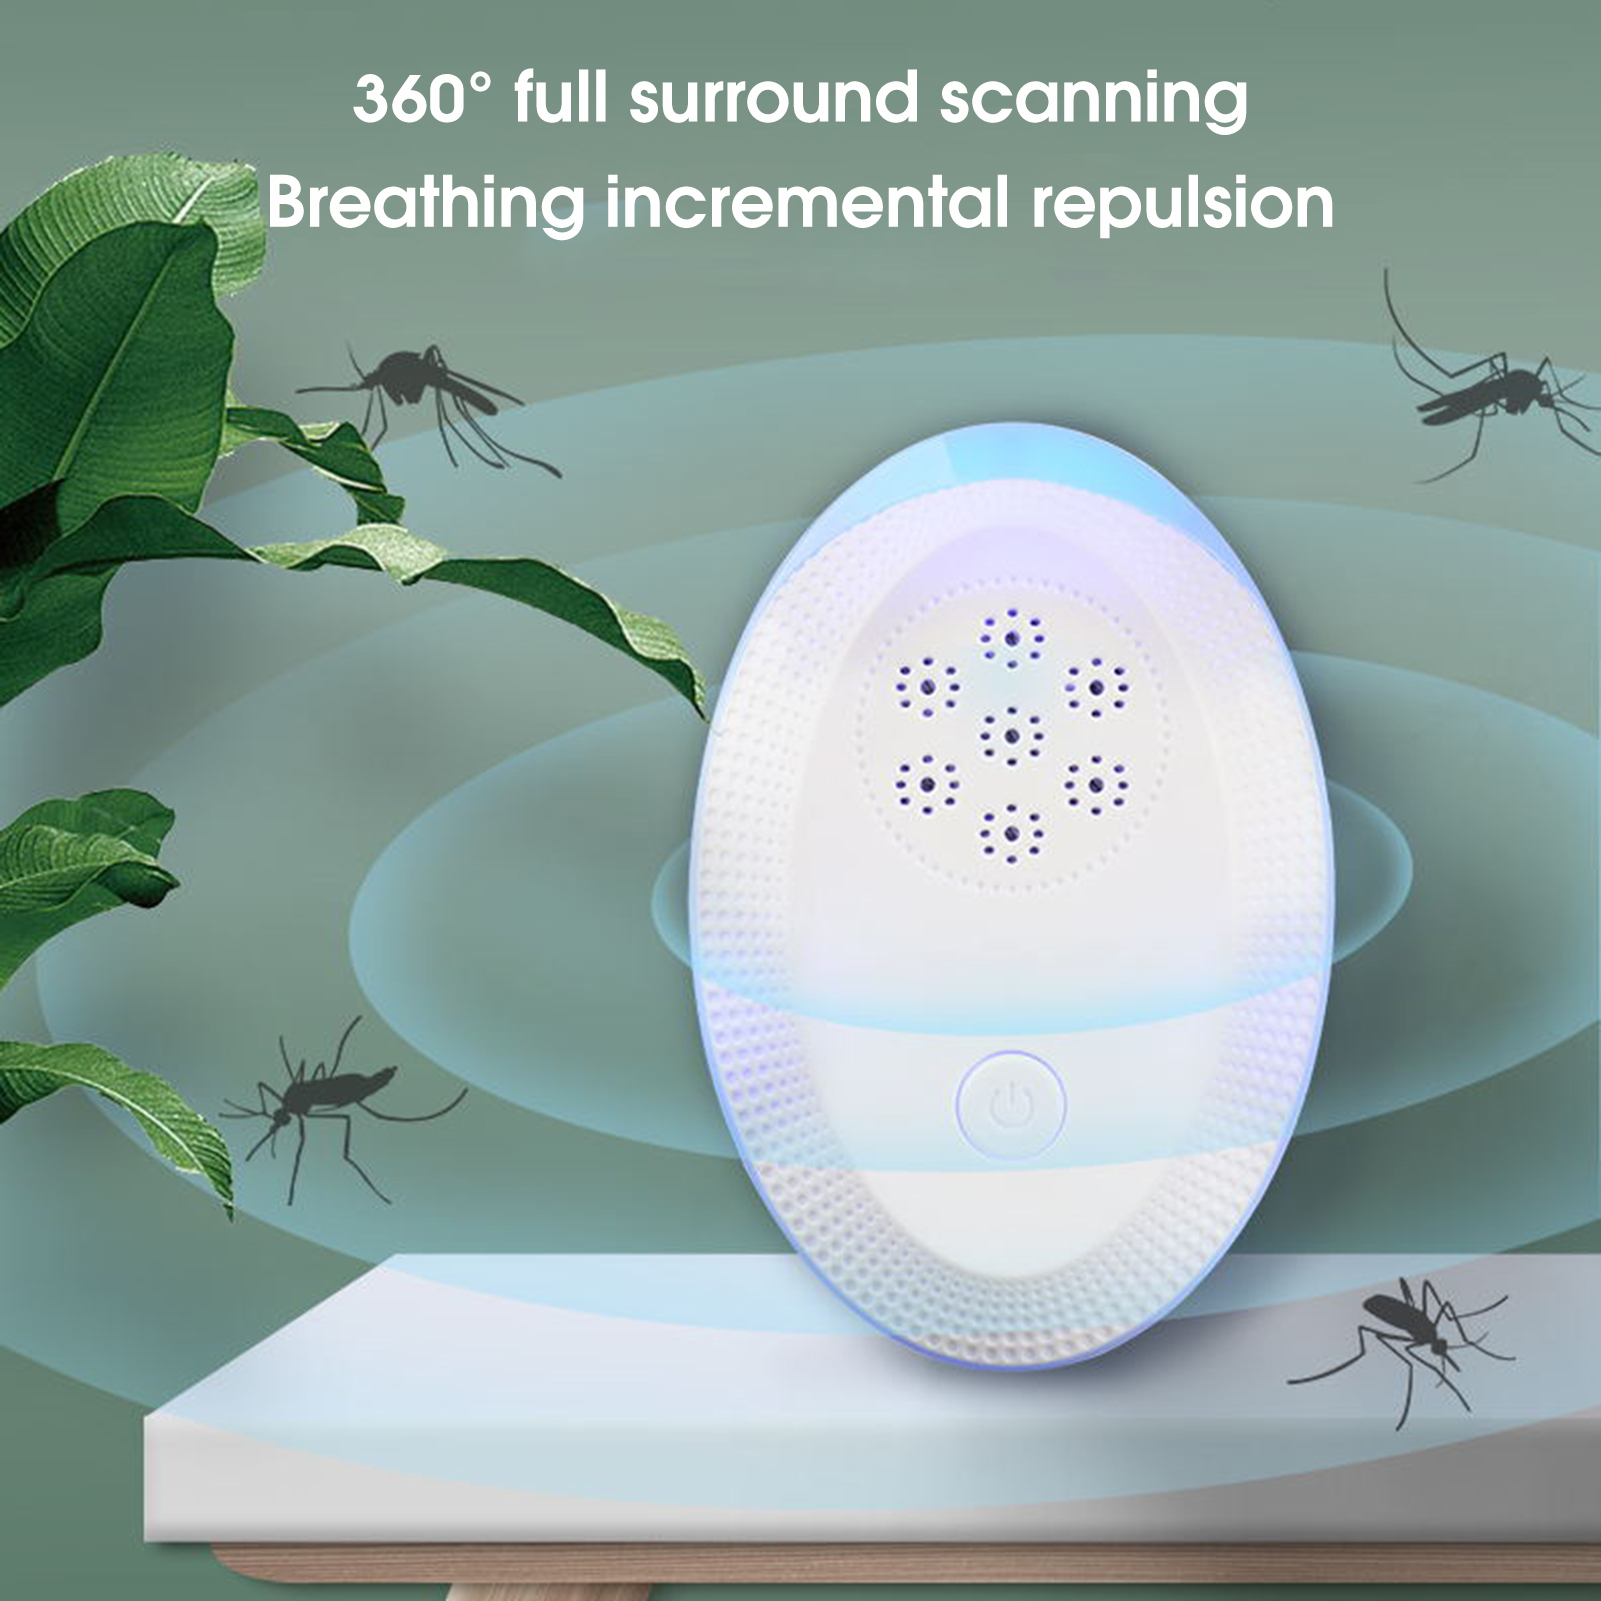 Ultrasonic Pest Repeller 8 Packs Pest Repellent Mosquito Repellent Indoors Mouse Repellent Pest Repellent Ultrasonic Plug in Rodent Repellent Pest Control for Mosquito,Ant,Spider,Cockroach,Mouse DY-218A